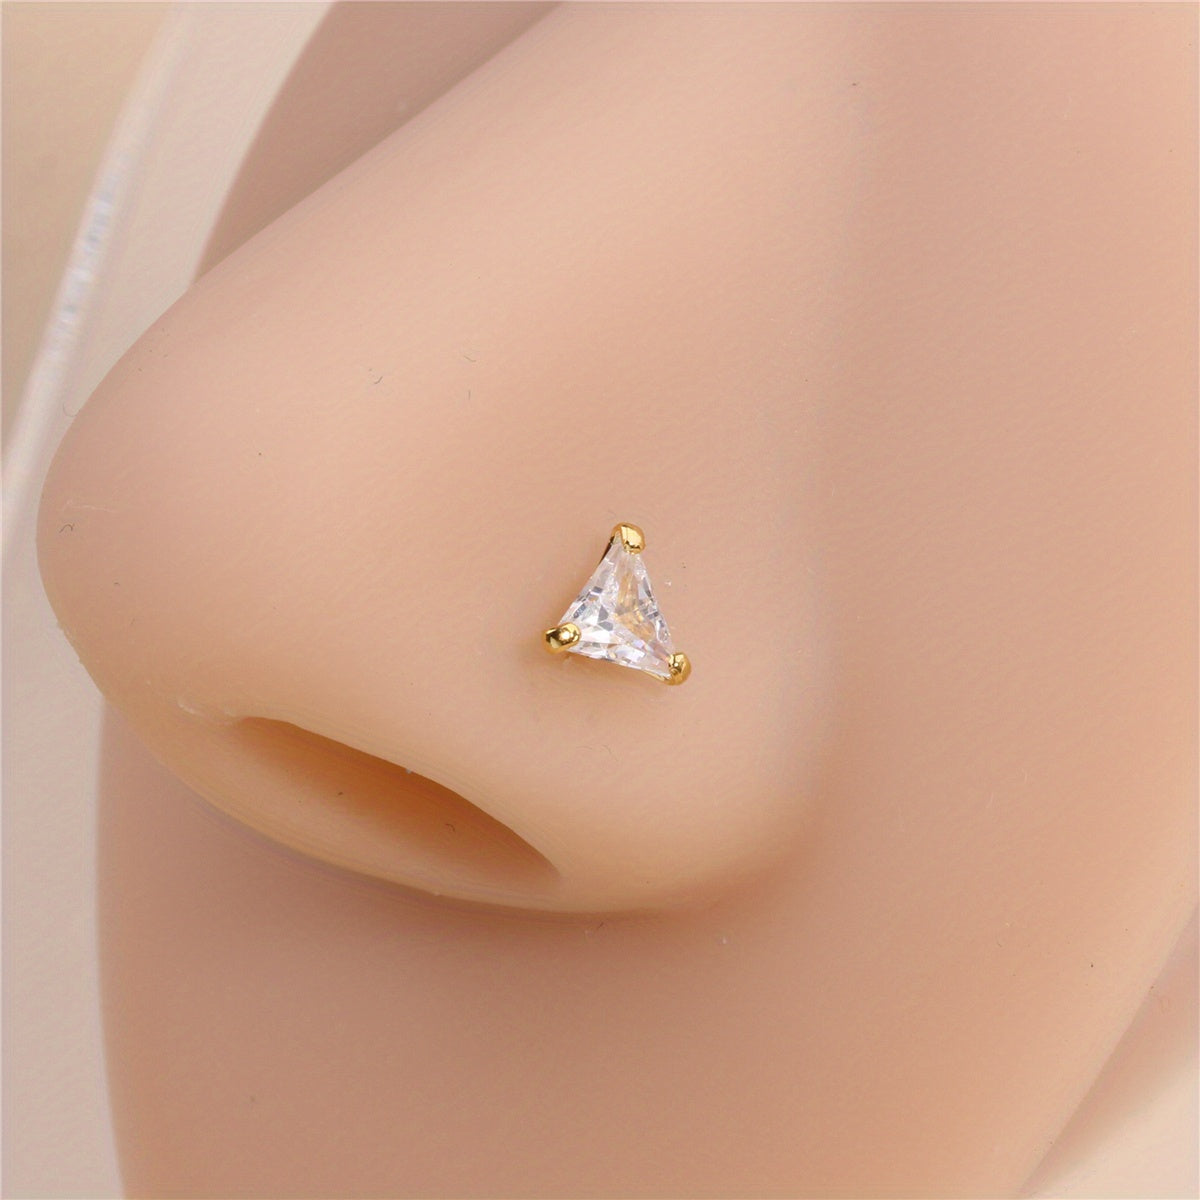 Inlaid Cubic Zirconia L Shape Nose Ring Studs For Women Body Piercing Jewelry